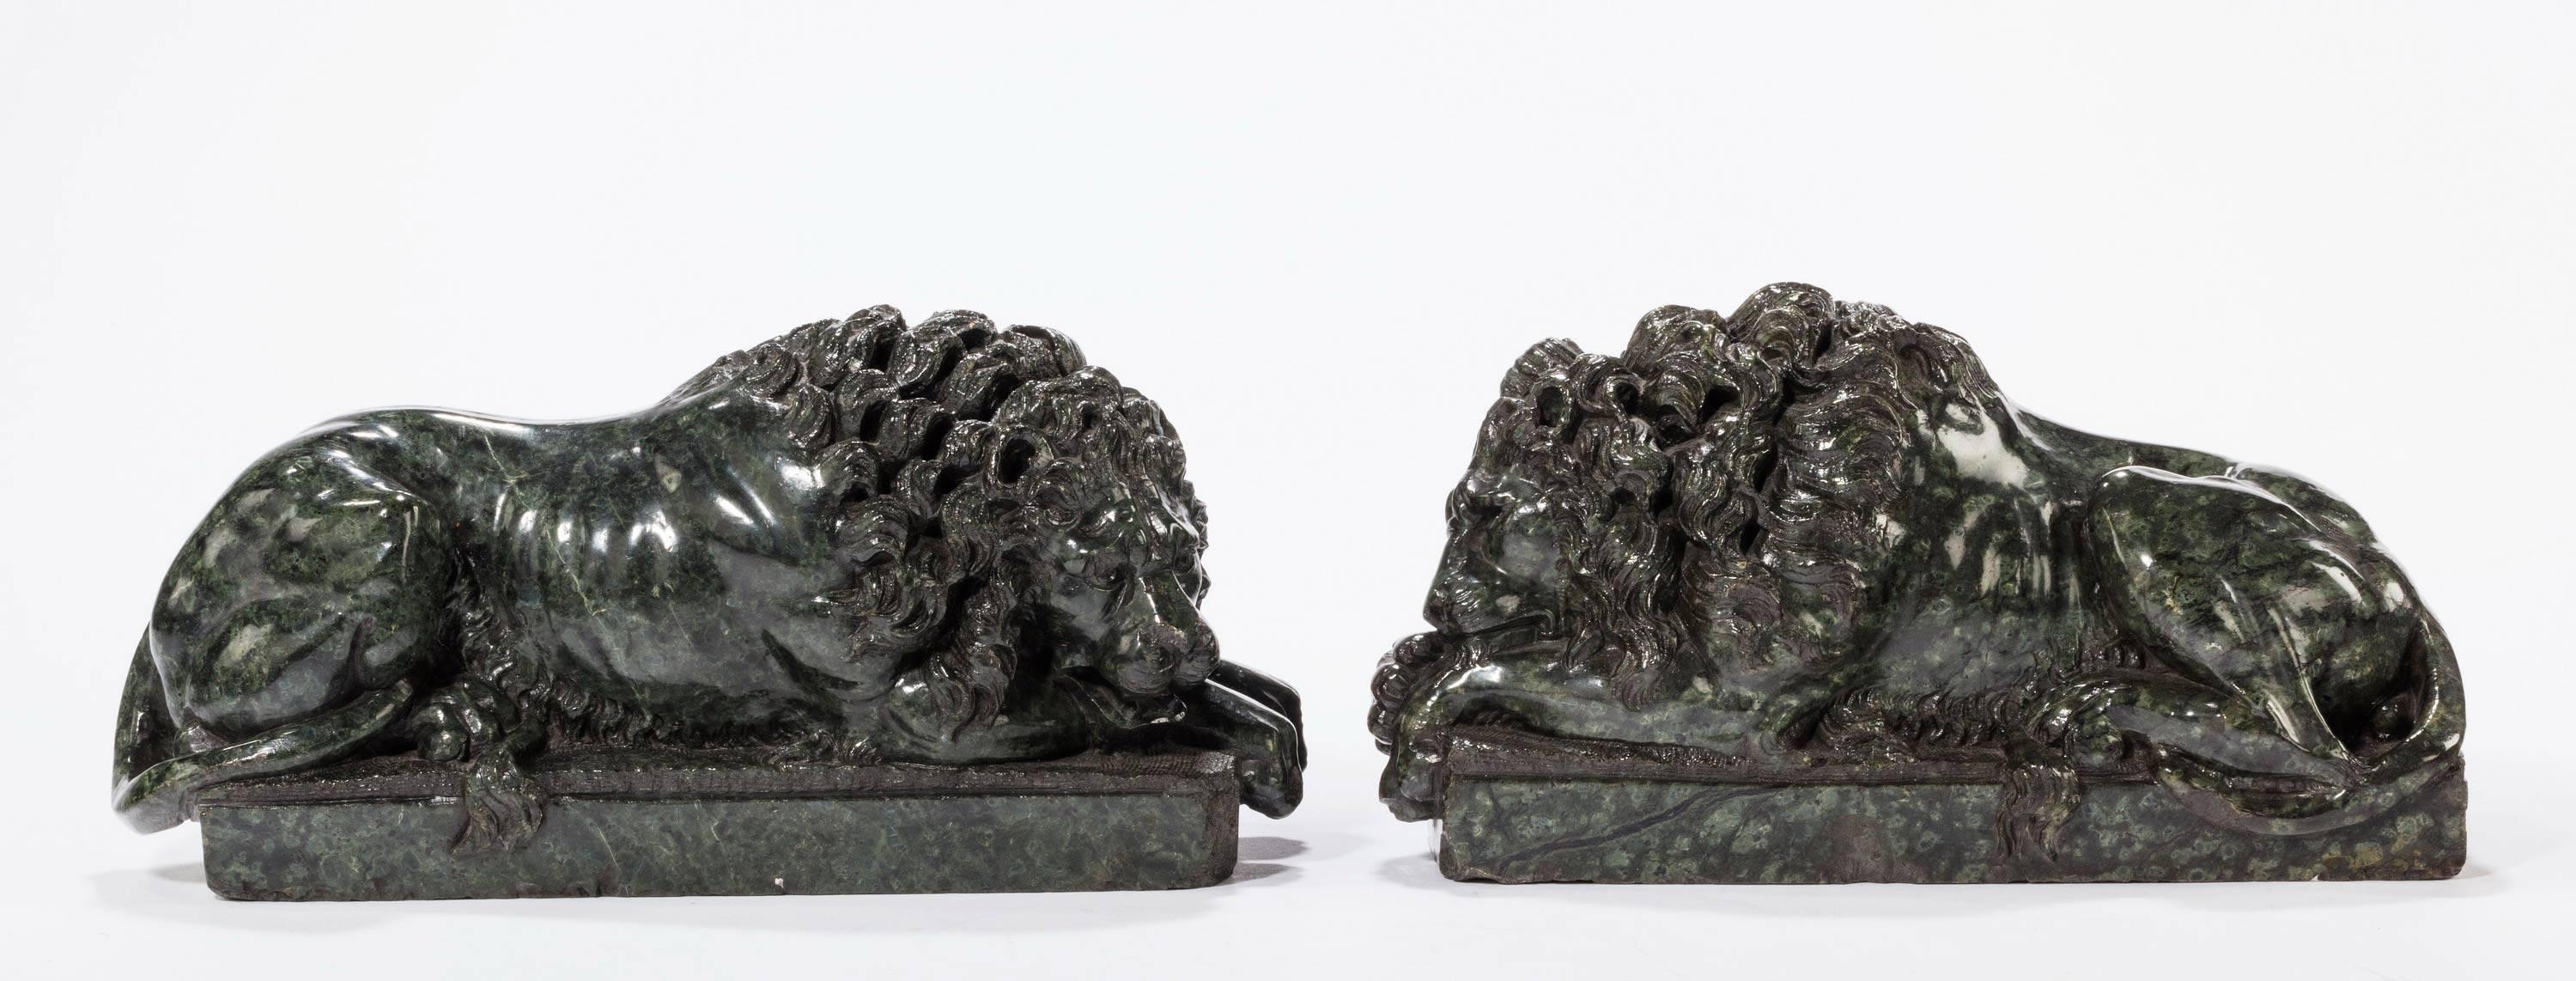 A finely modelled pair of serpentine desk lions after the models by Conover. Excellent overall condition and showing age patina.